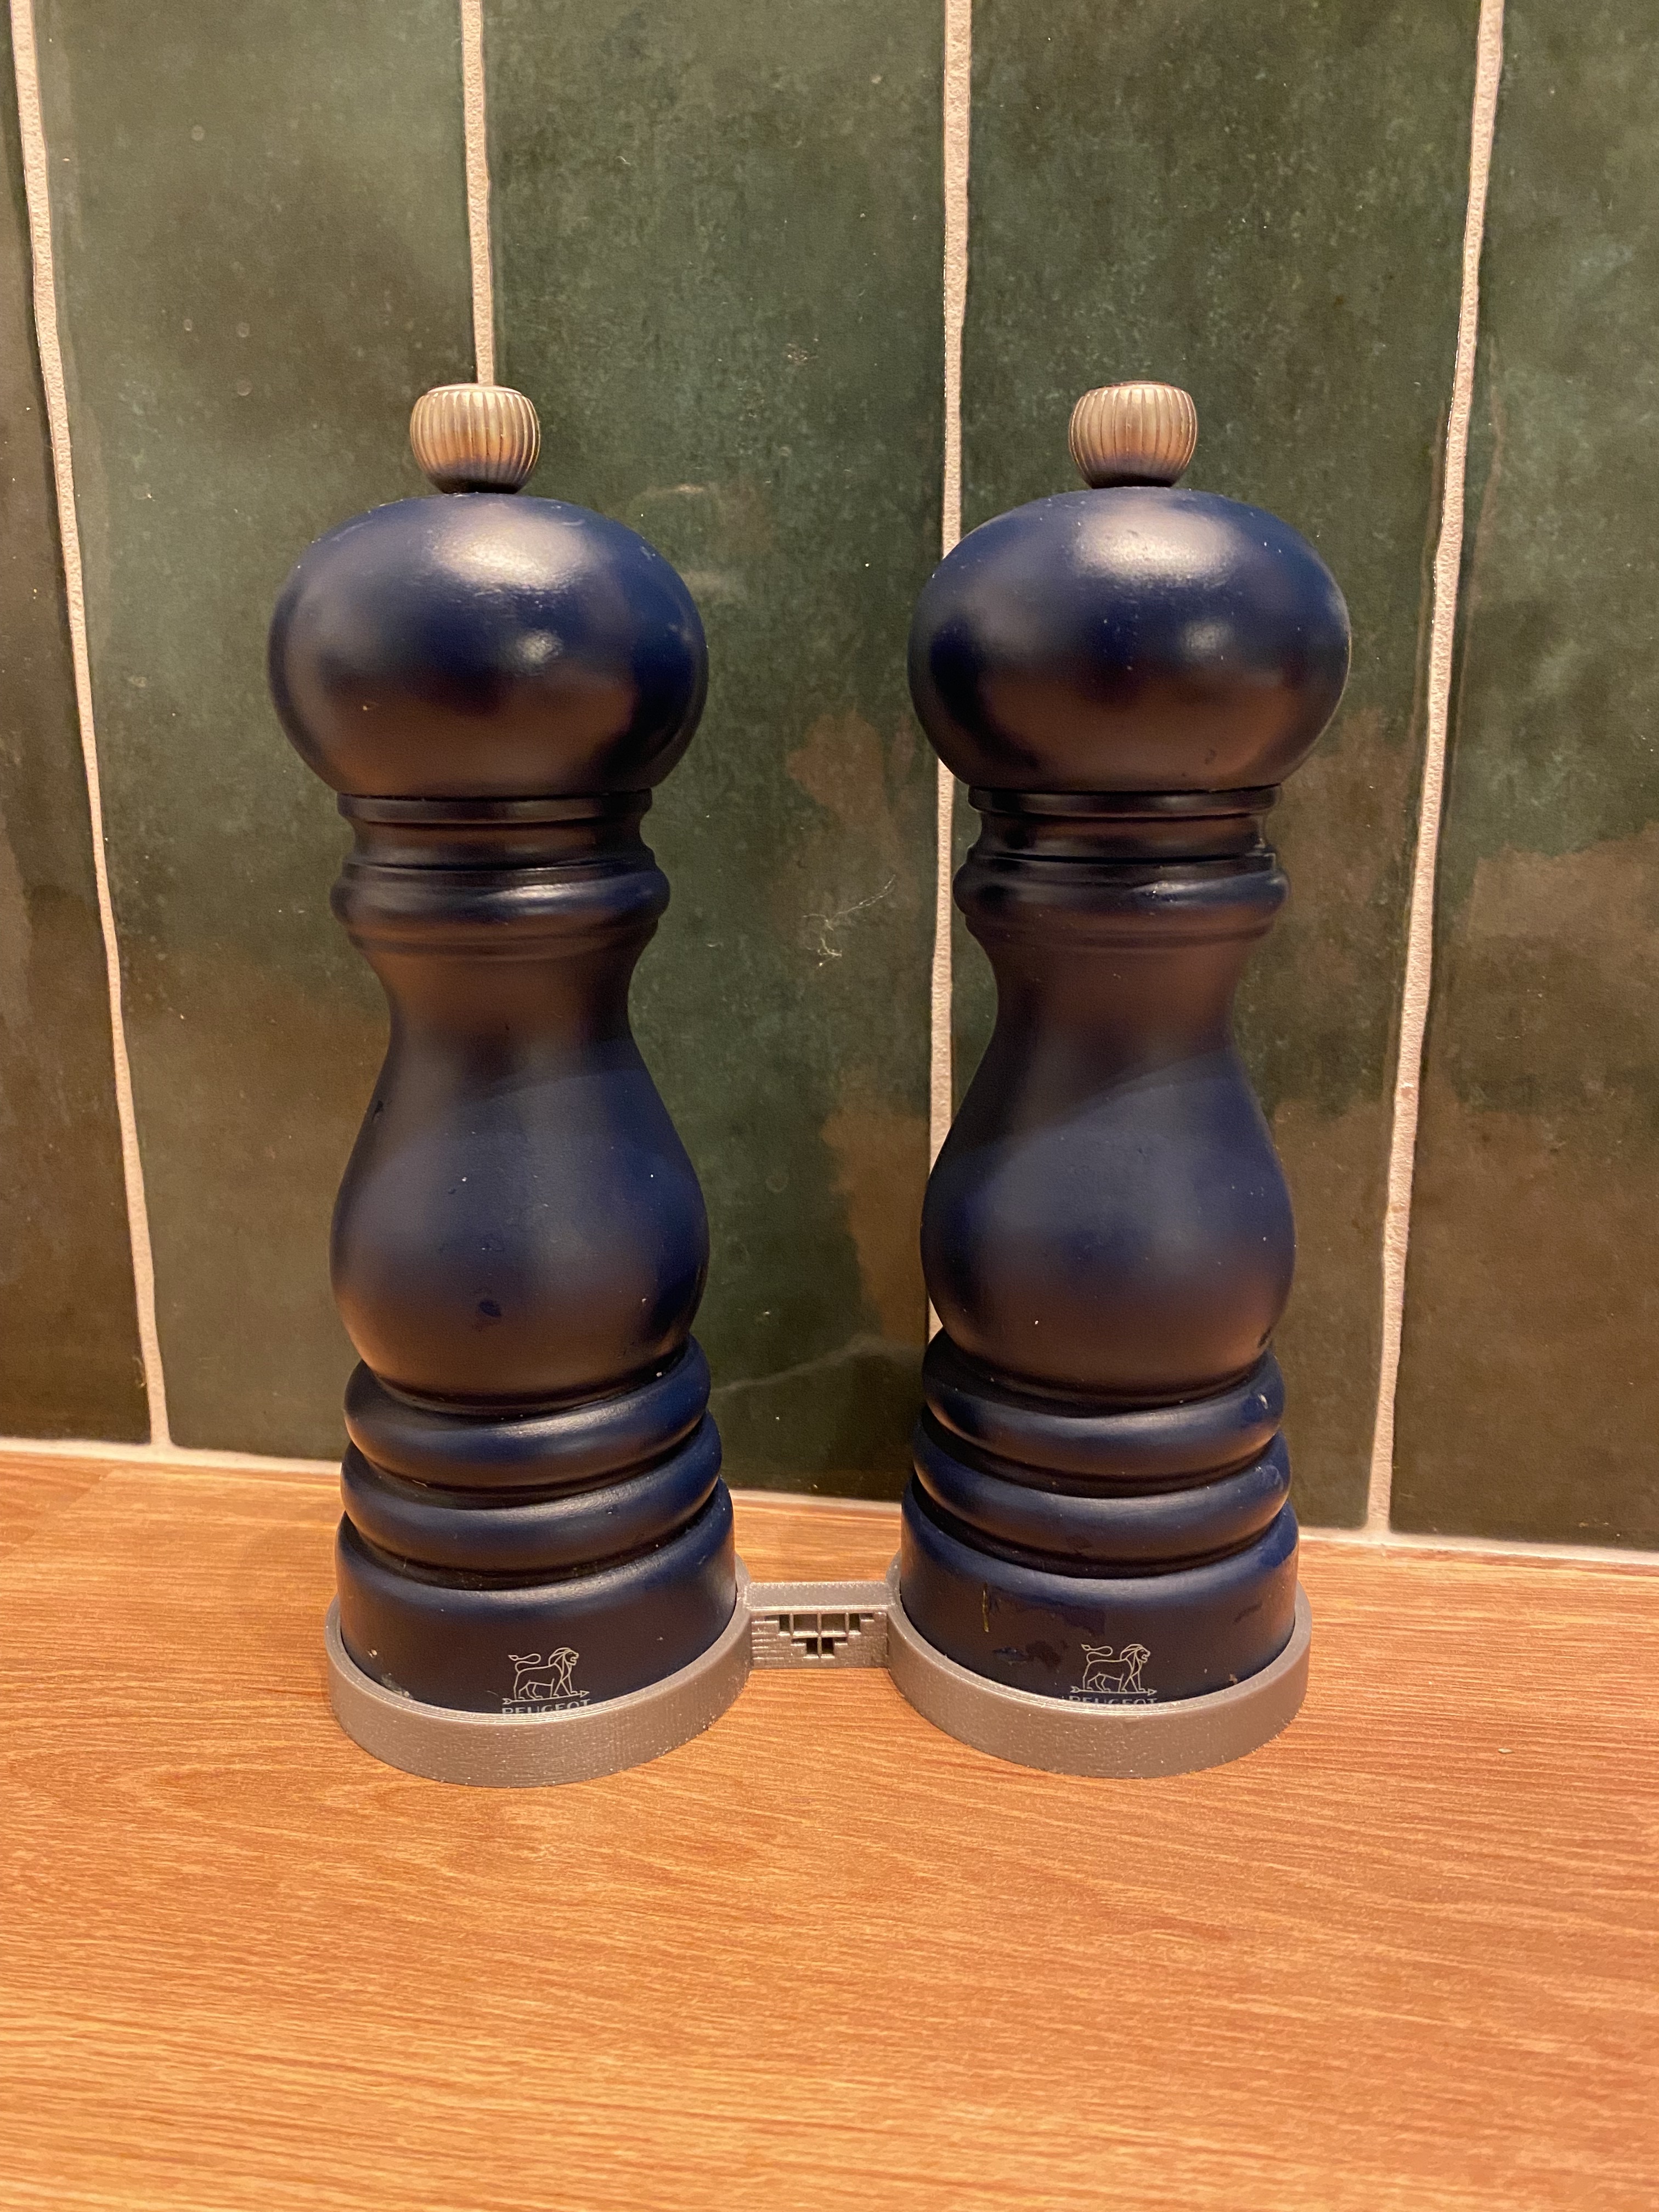 Pepper and Salt grinder mill covers